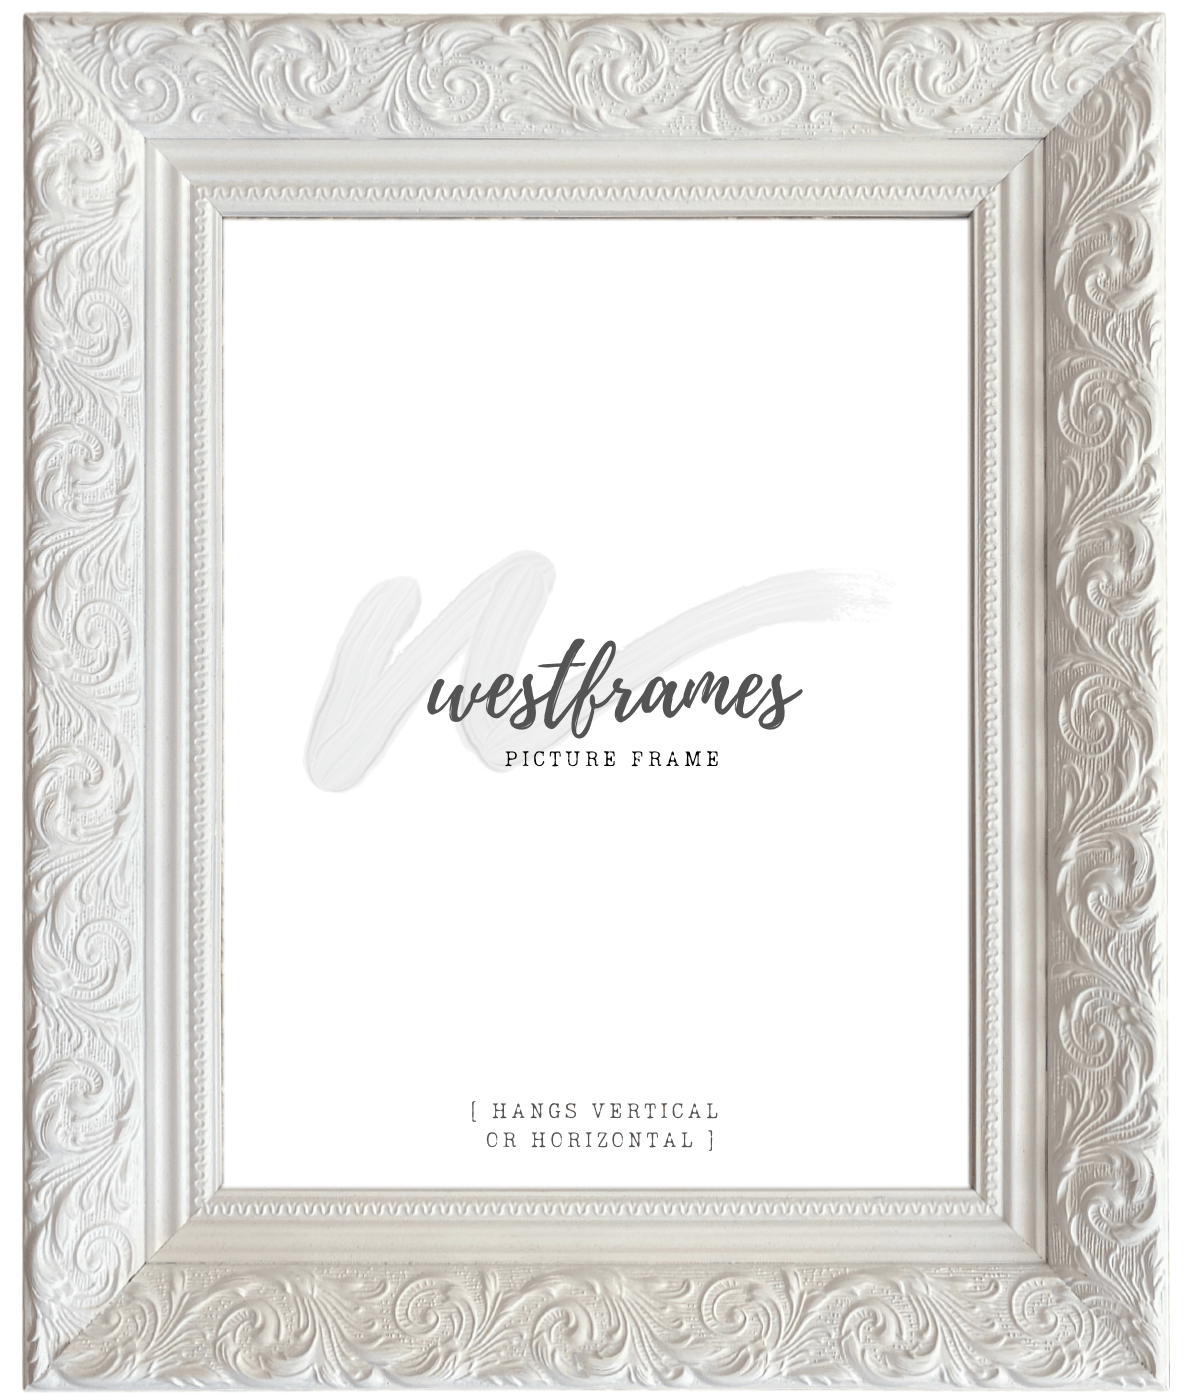 Bella French Ornate Embossed Wood Wall Picture Frame Shabby White 2.5" Wide - West Frames